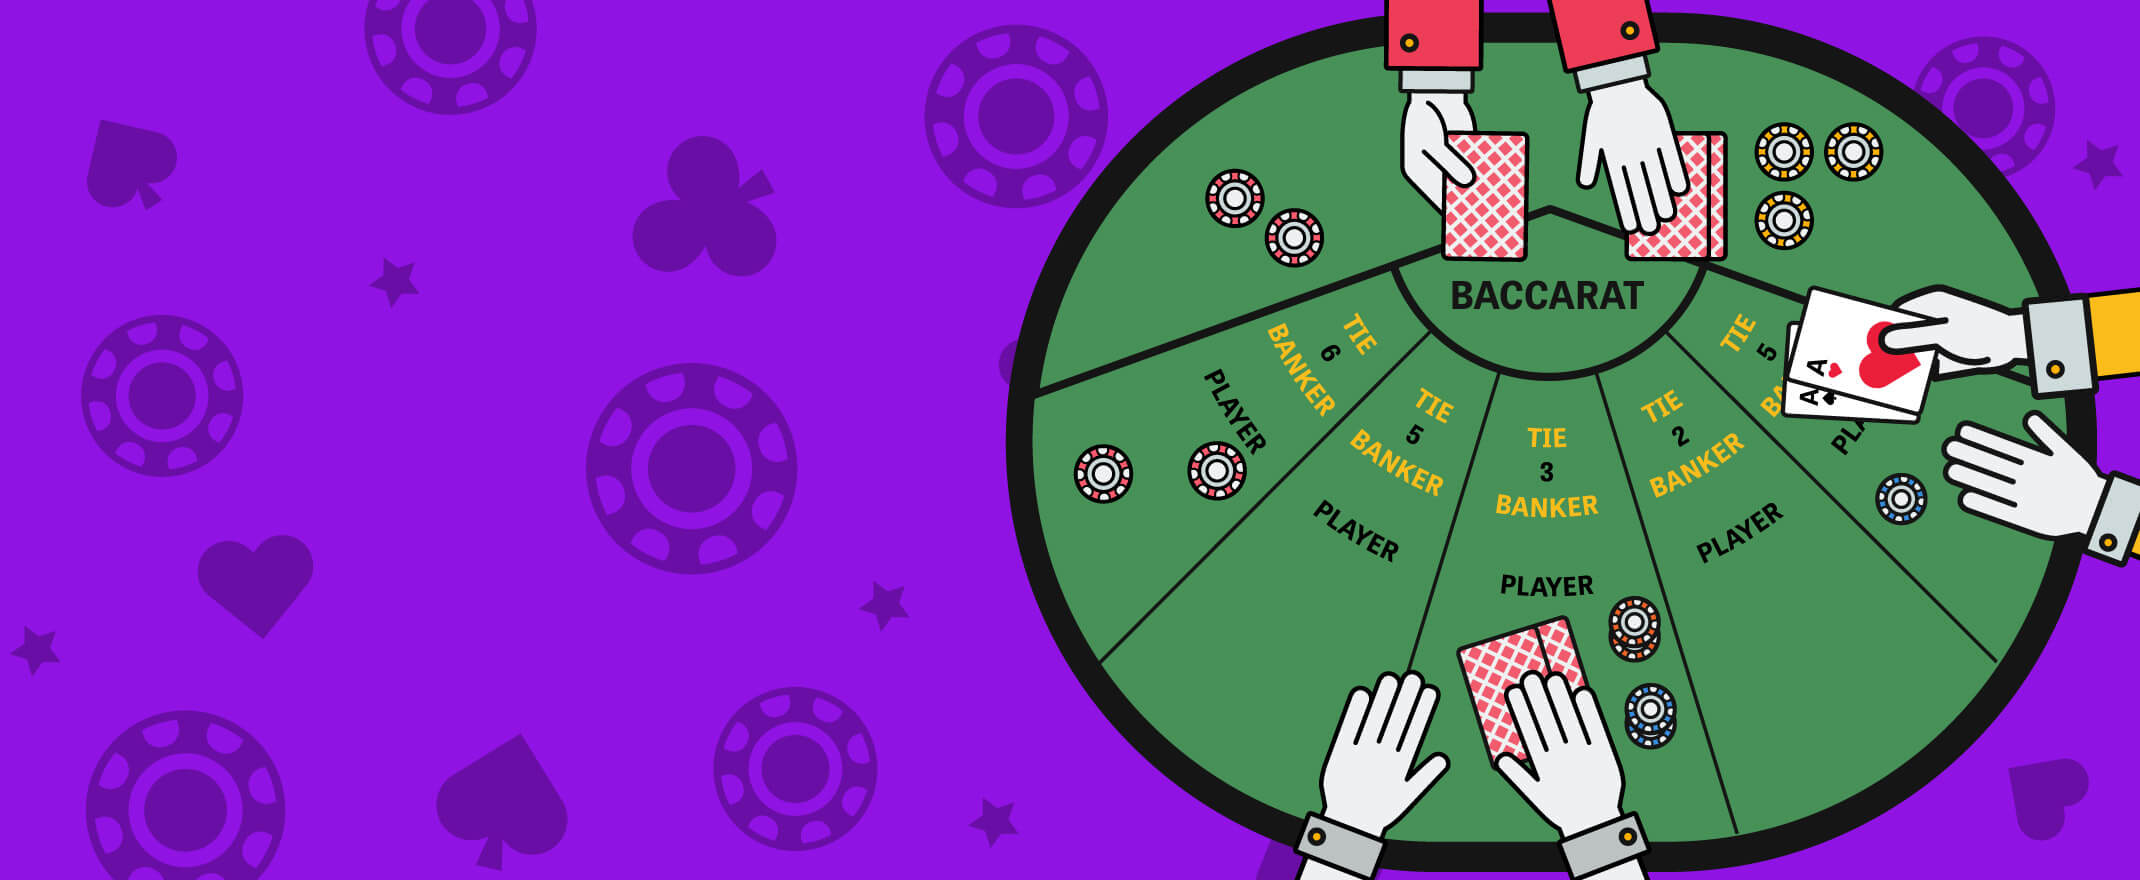 Online baccarat: The rules of the game